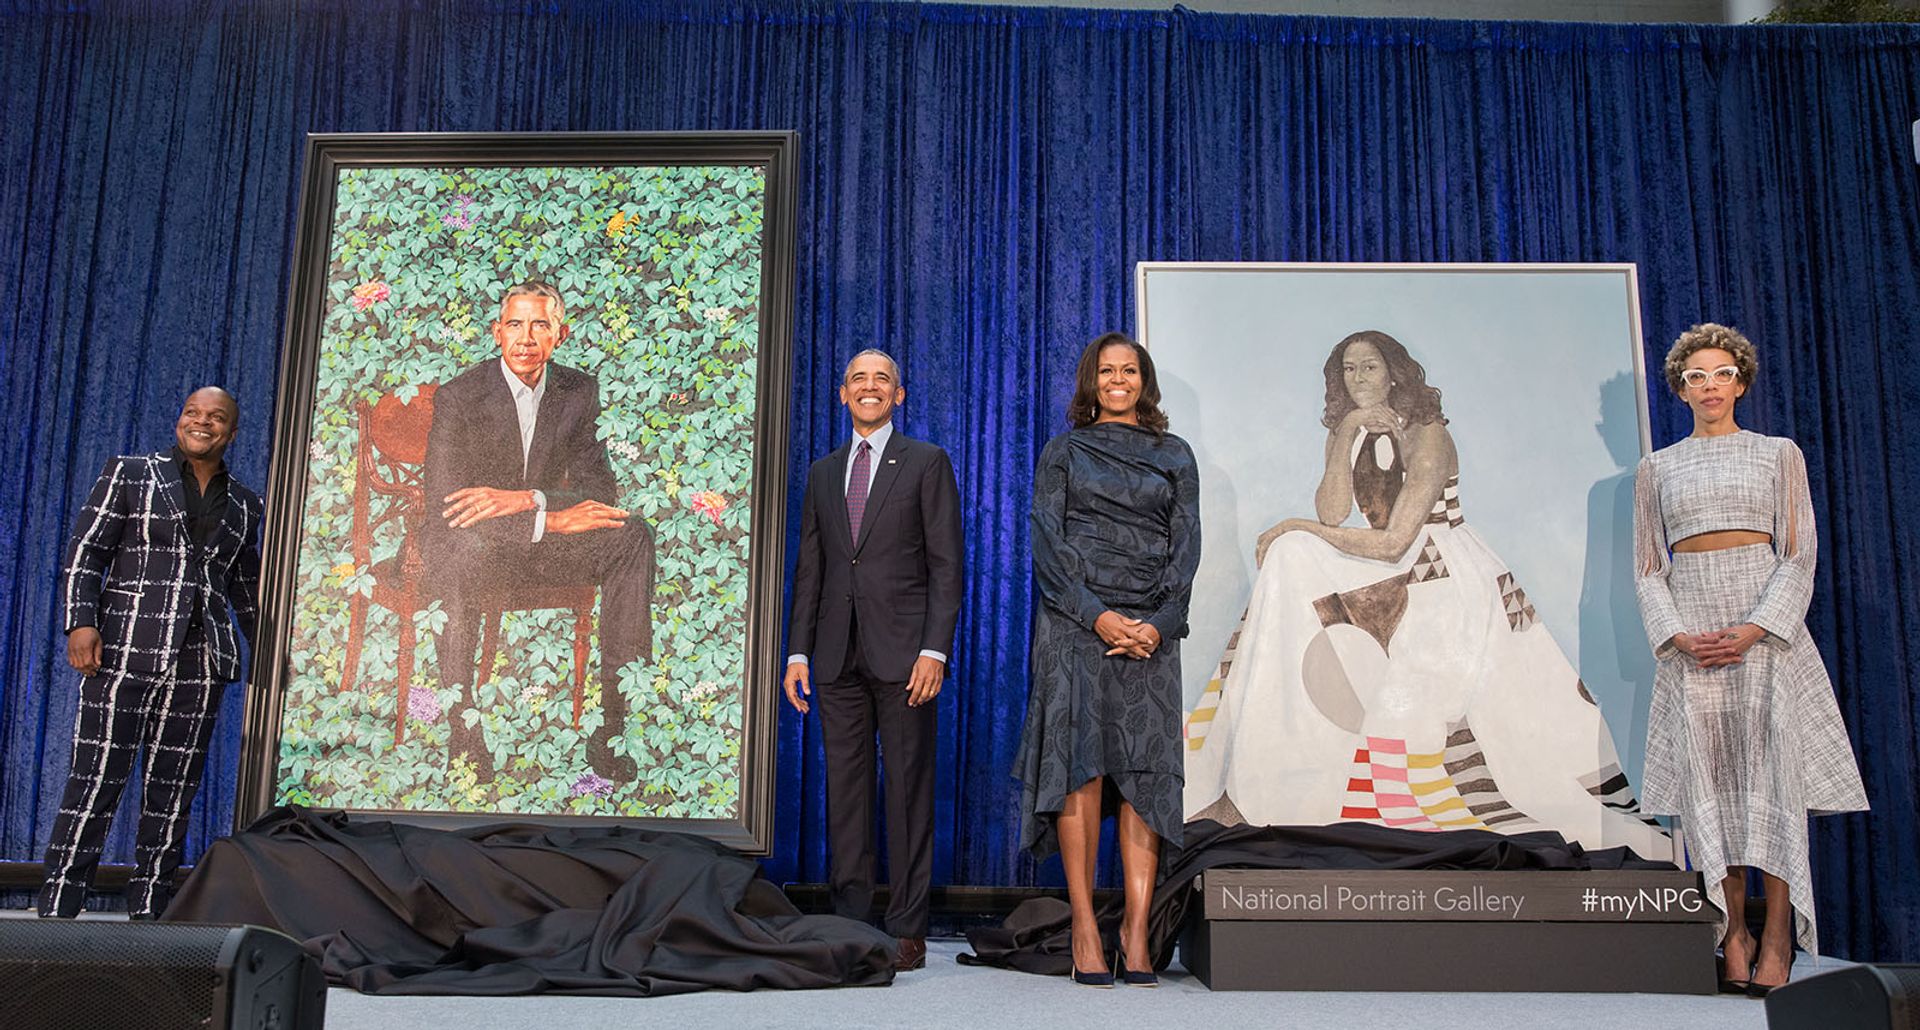 Former President Barack and First Lady Michele Obama (centre) stand with the artists Kehinde Wiley and Amy Sherald in front of their official portraits during a ceremony at the Smithsonian's National Portrait Gallery Photo: Pete Souza